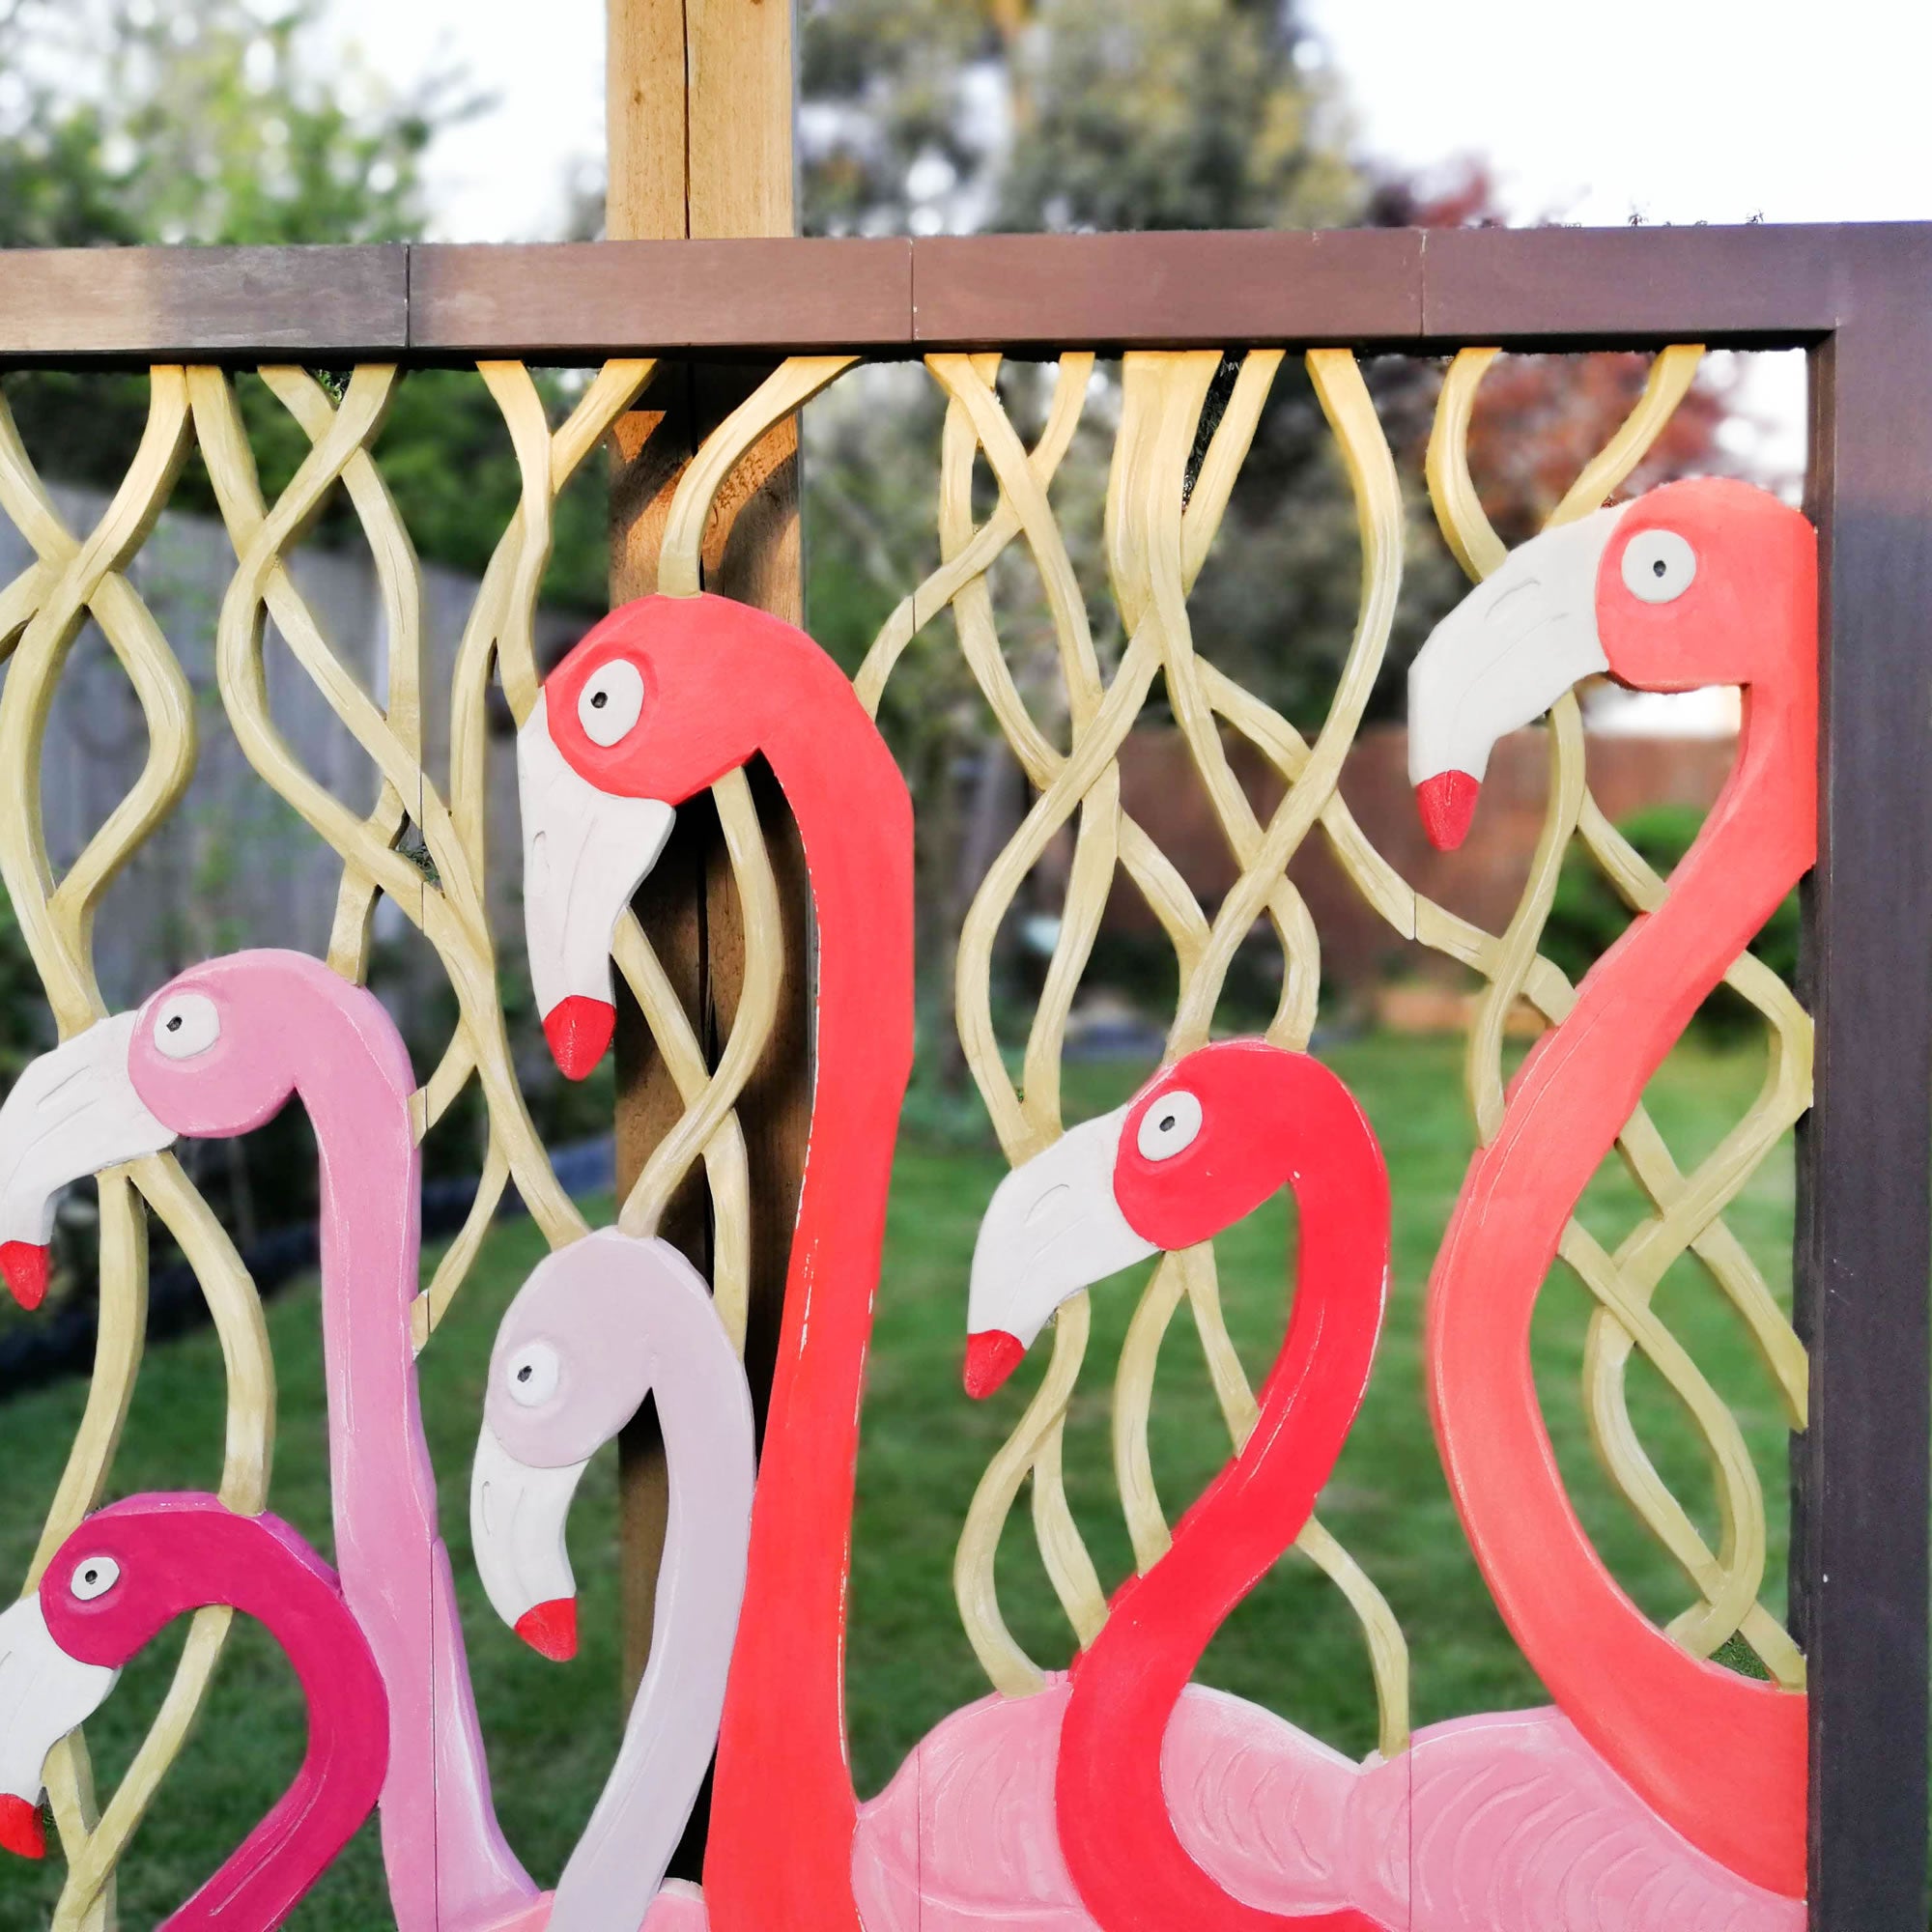 Carved Painted Wooden Wall Art - Large Headboard Decorative Flamingos